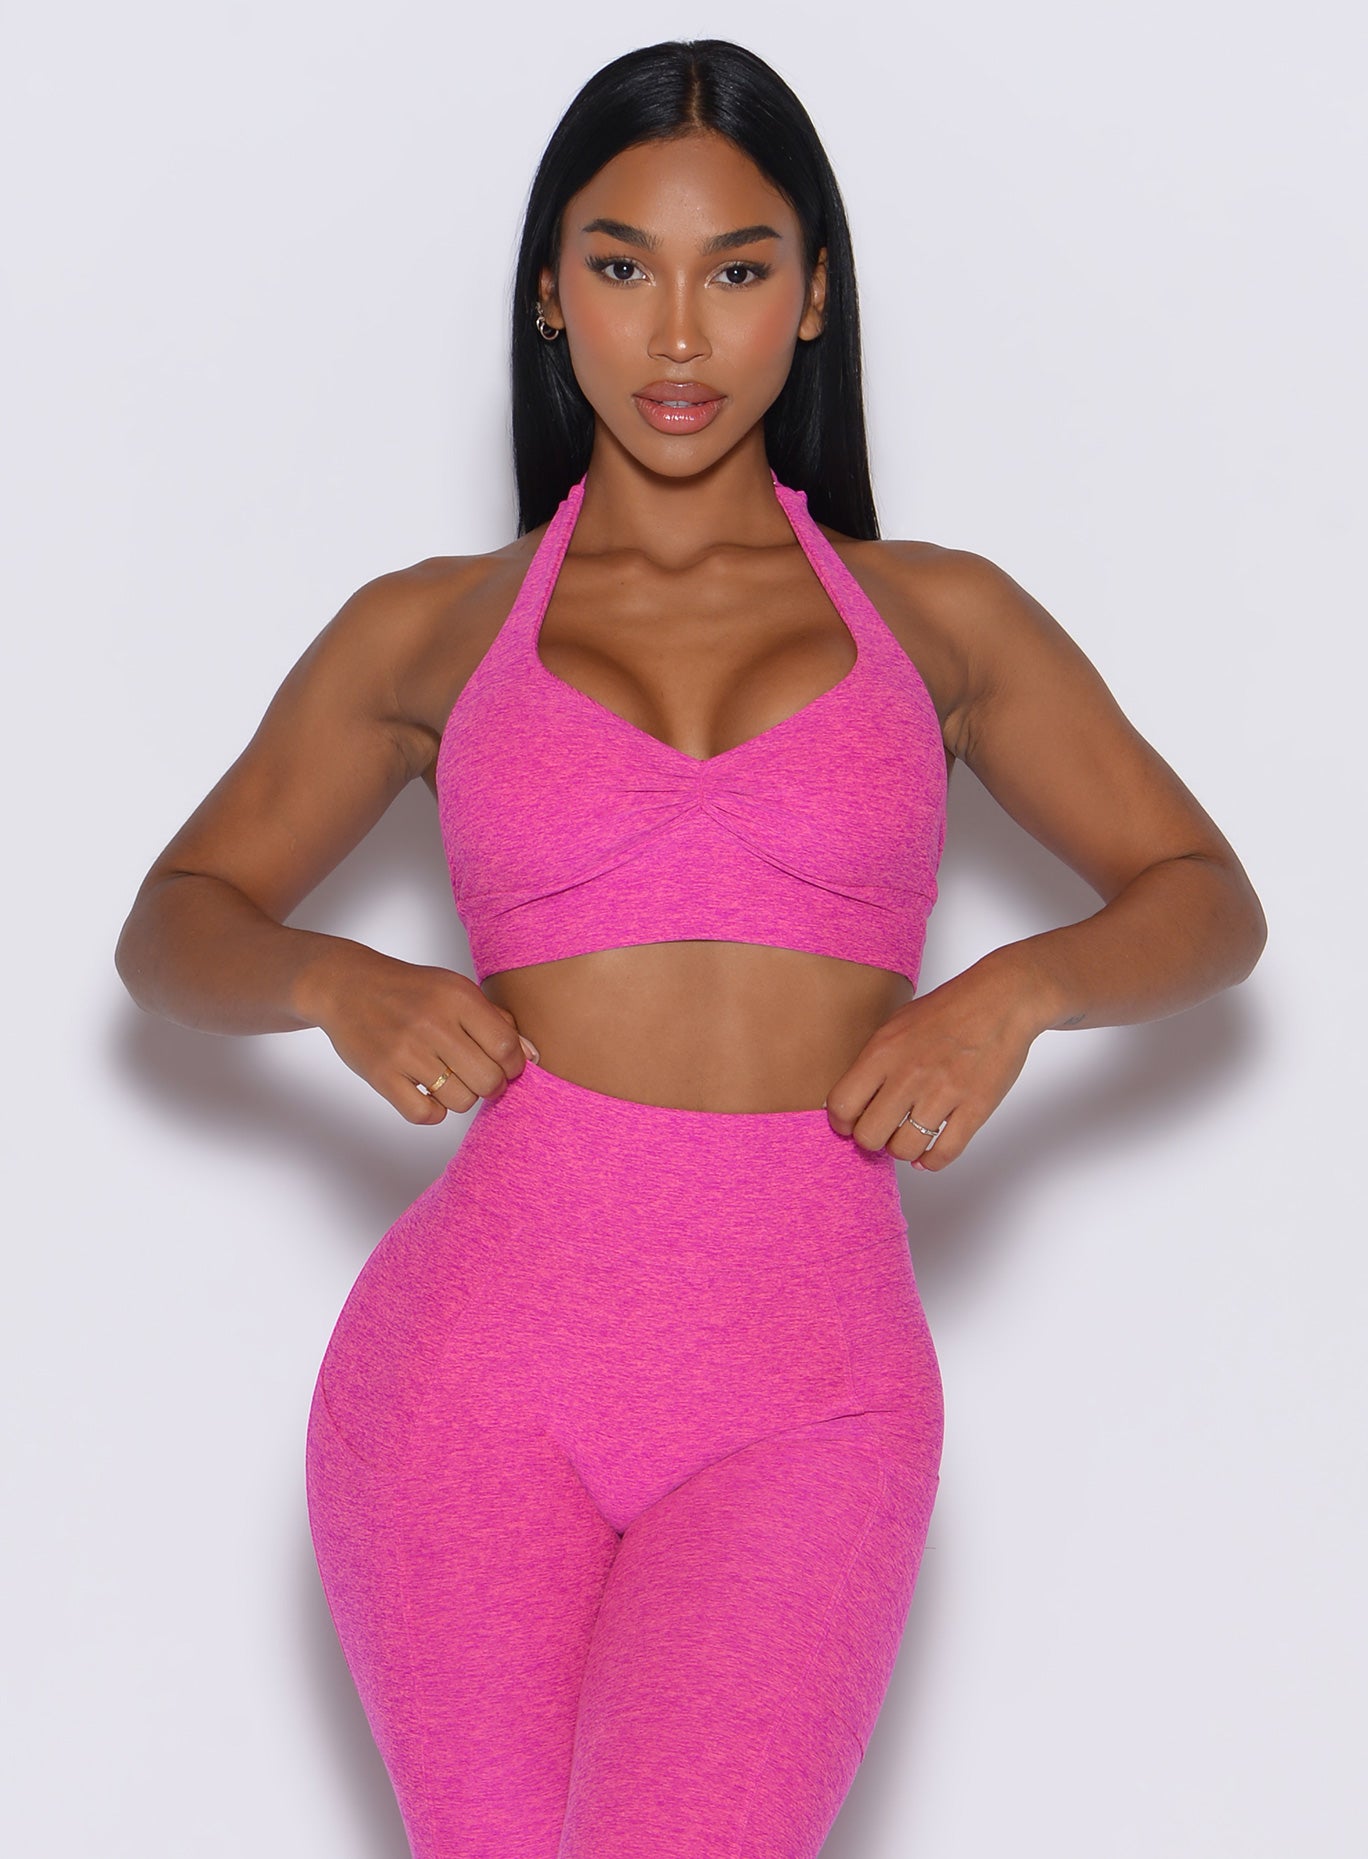 front profile view of a model adjusting her waistband wearing our backless bra in Neon Pink Sorbet color along with the matching leggings